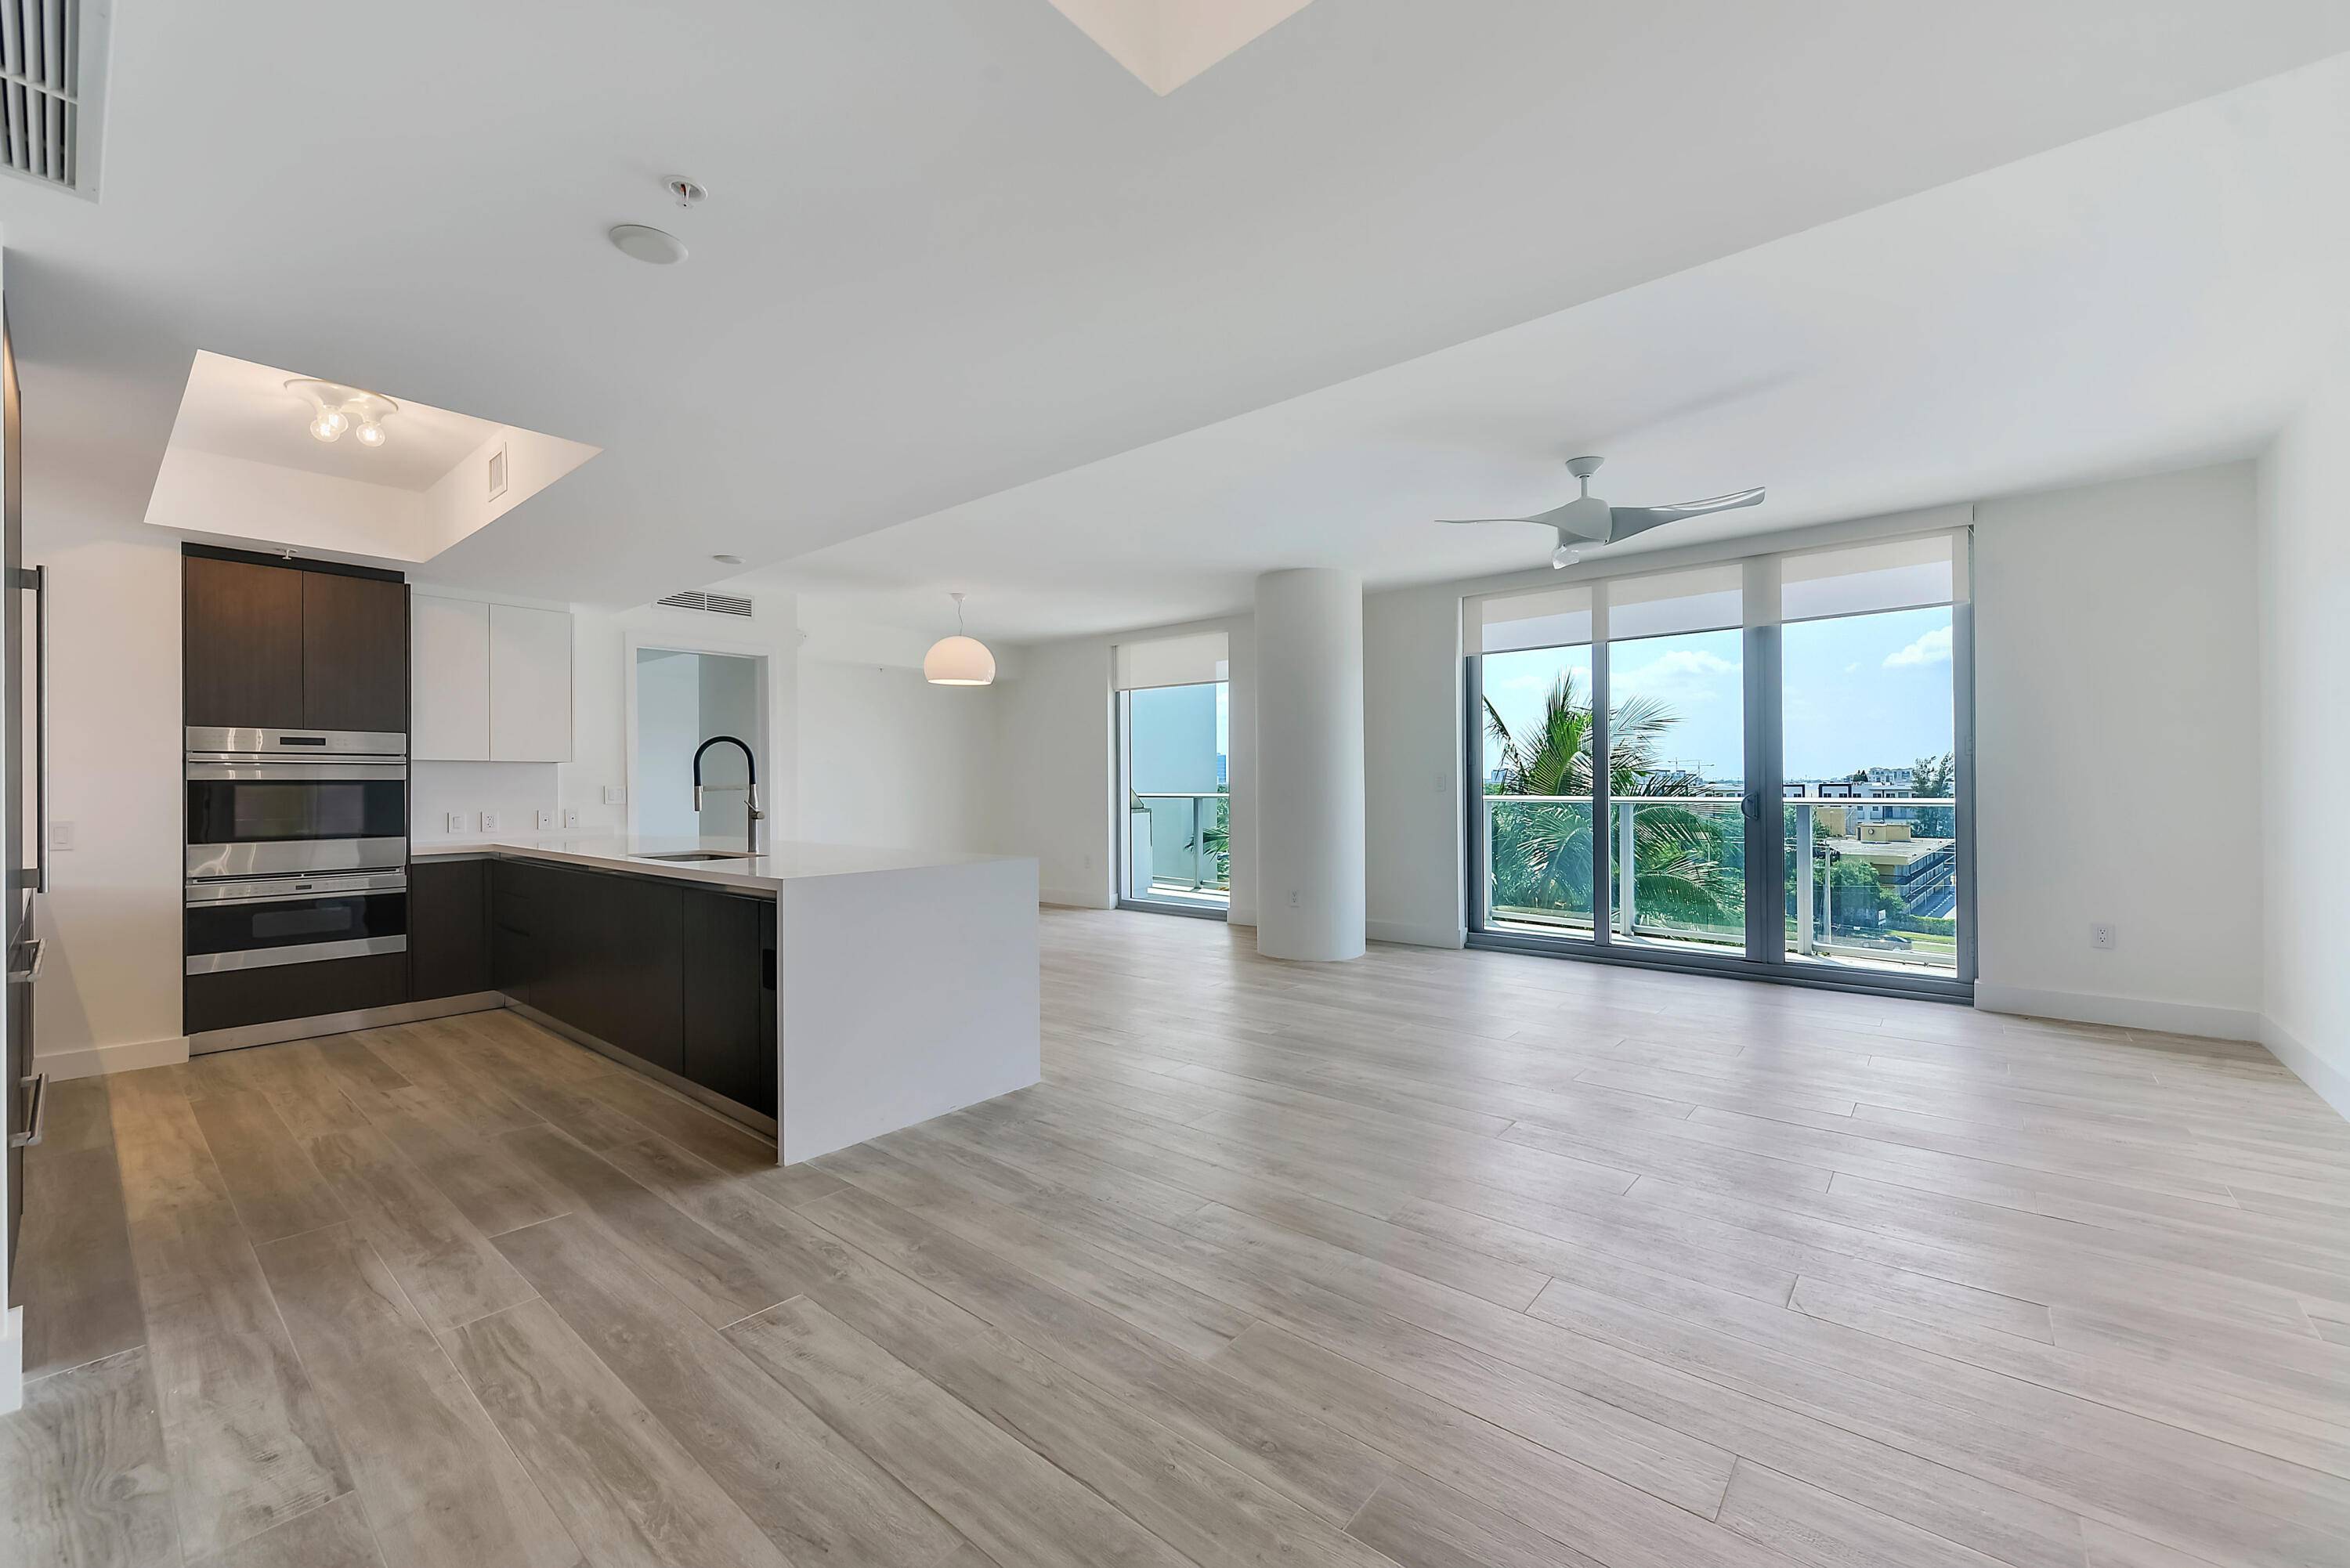 Waterfront Location ! Contemporary Italian designed new construction in the heart of Fort Lauderdale.